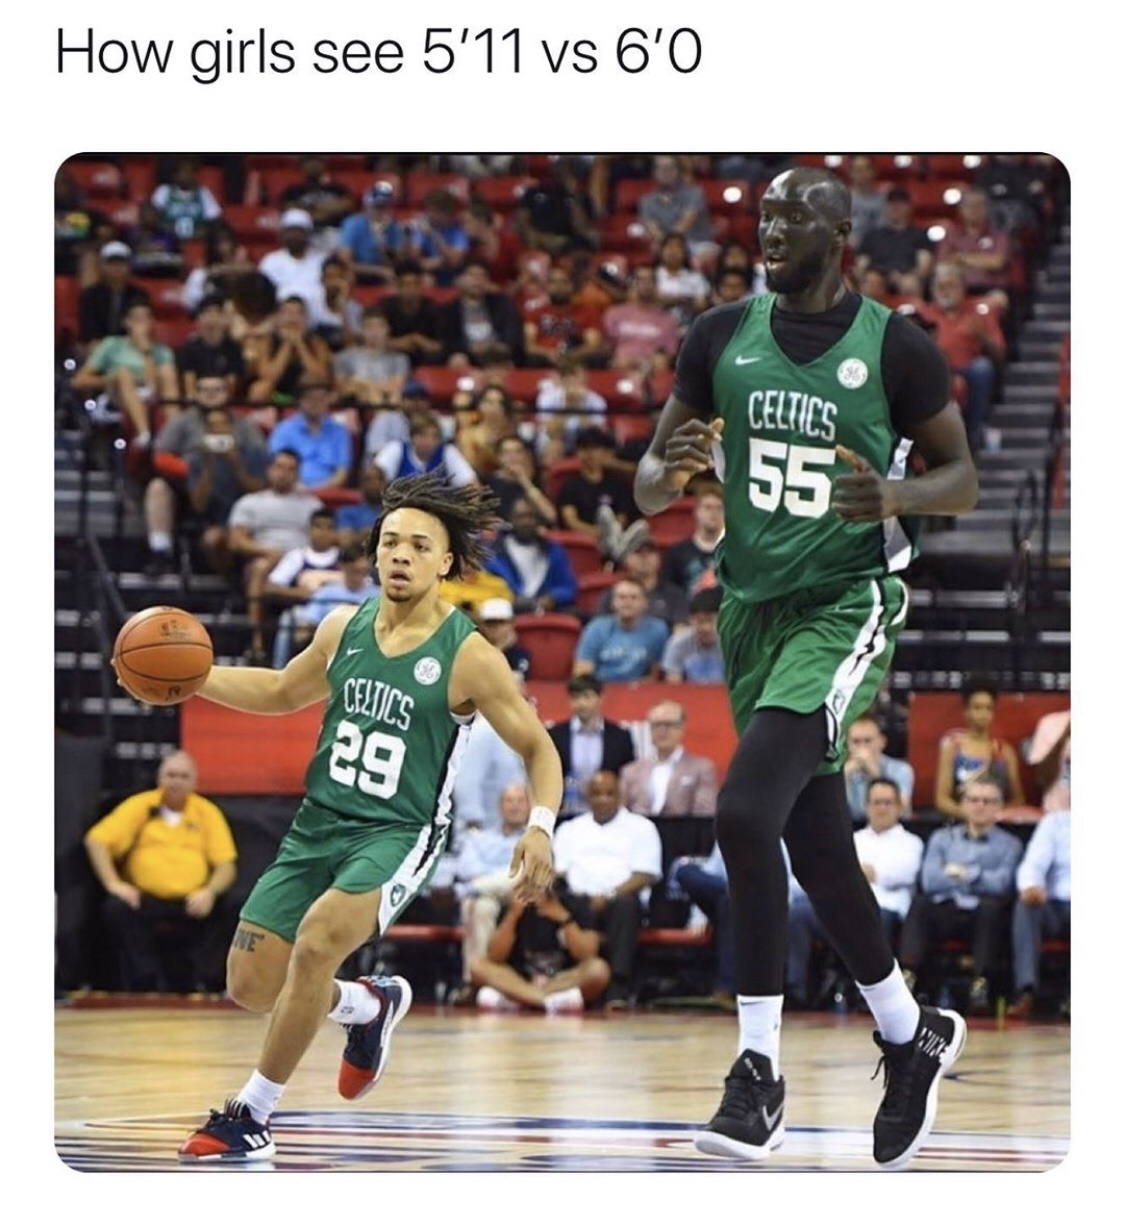 funny memes - How girls see 5'11 vs 6'0 basketball players